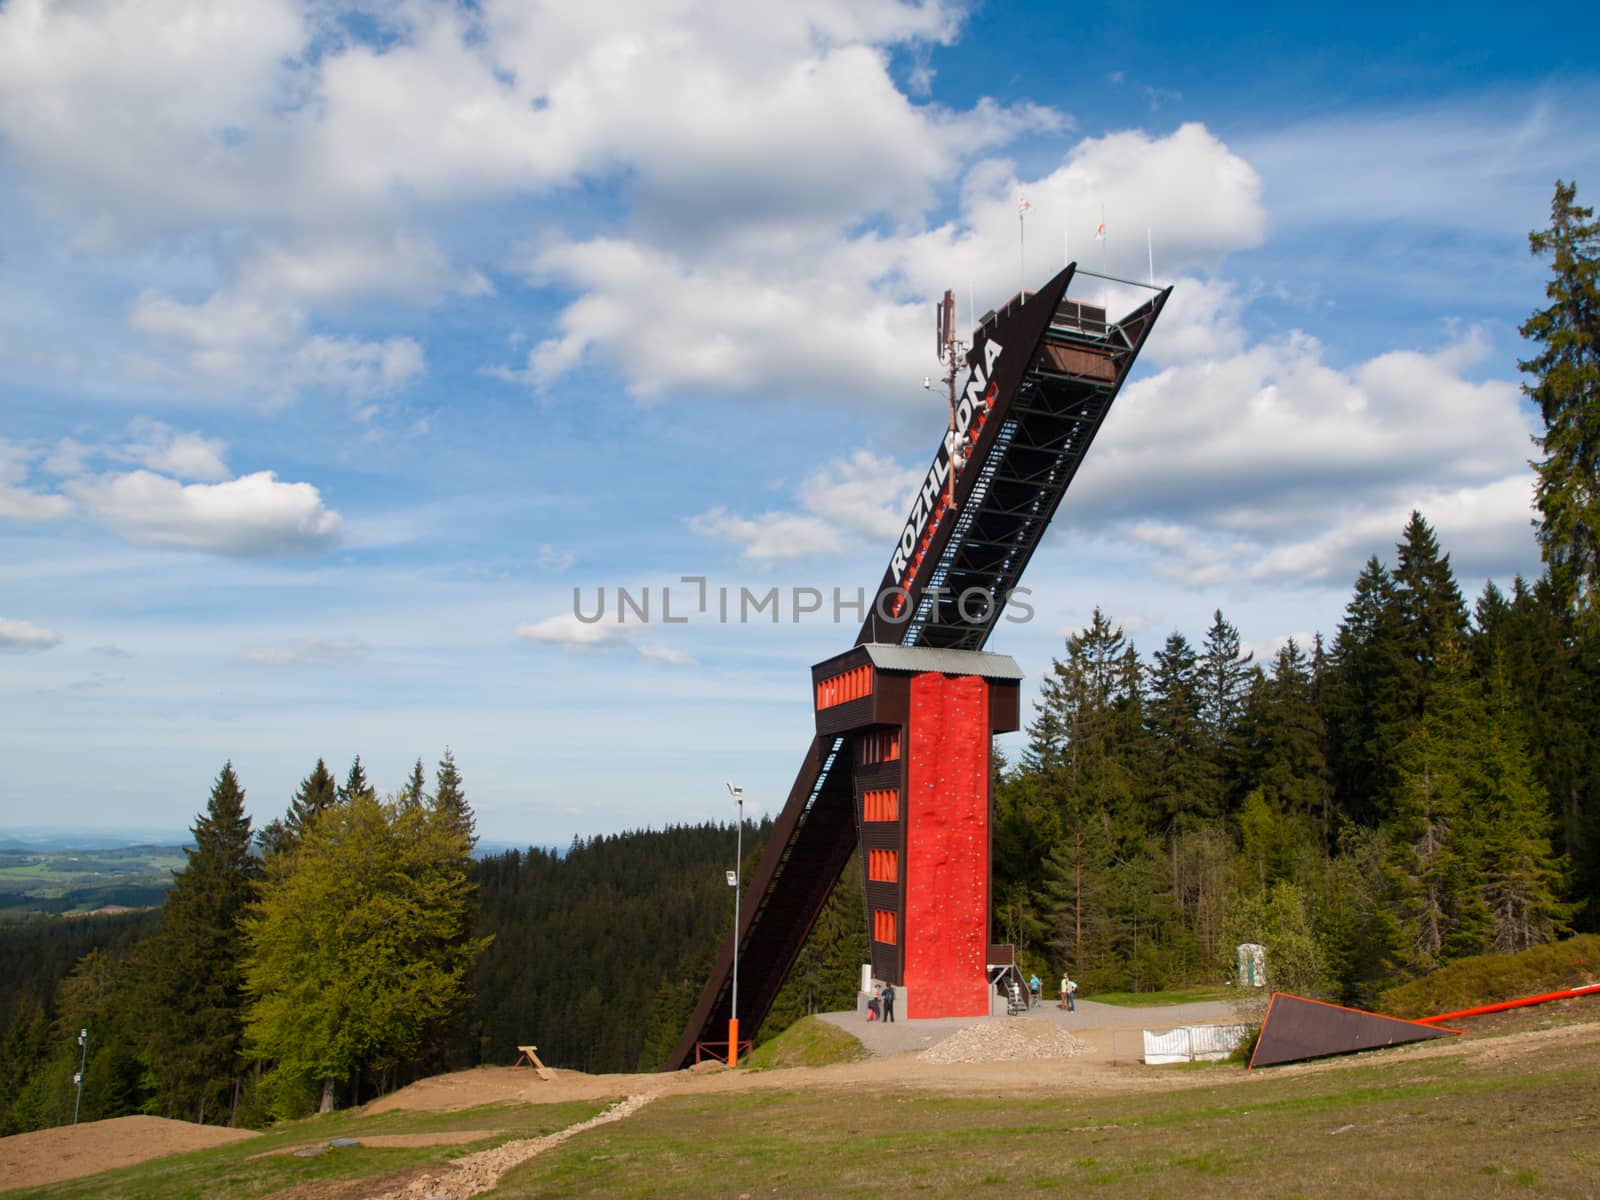 Zadov lookout tower - former ski jump in Sumava Mountains, Czech Republic by pyty